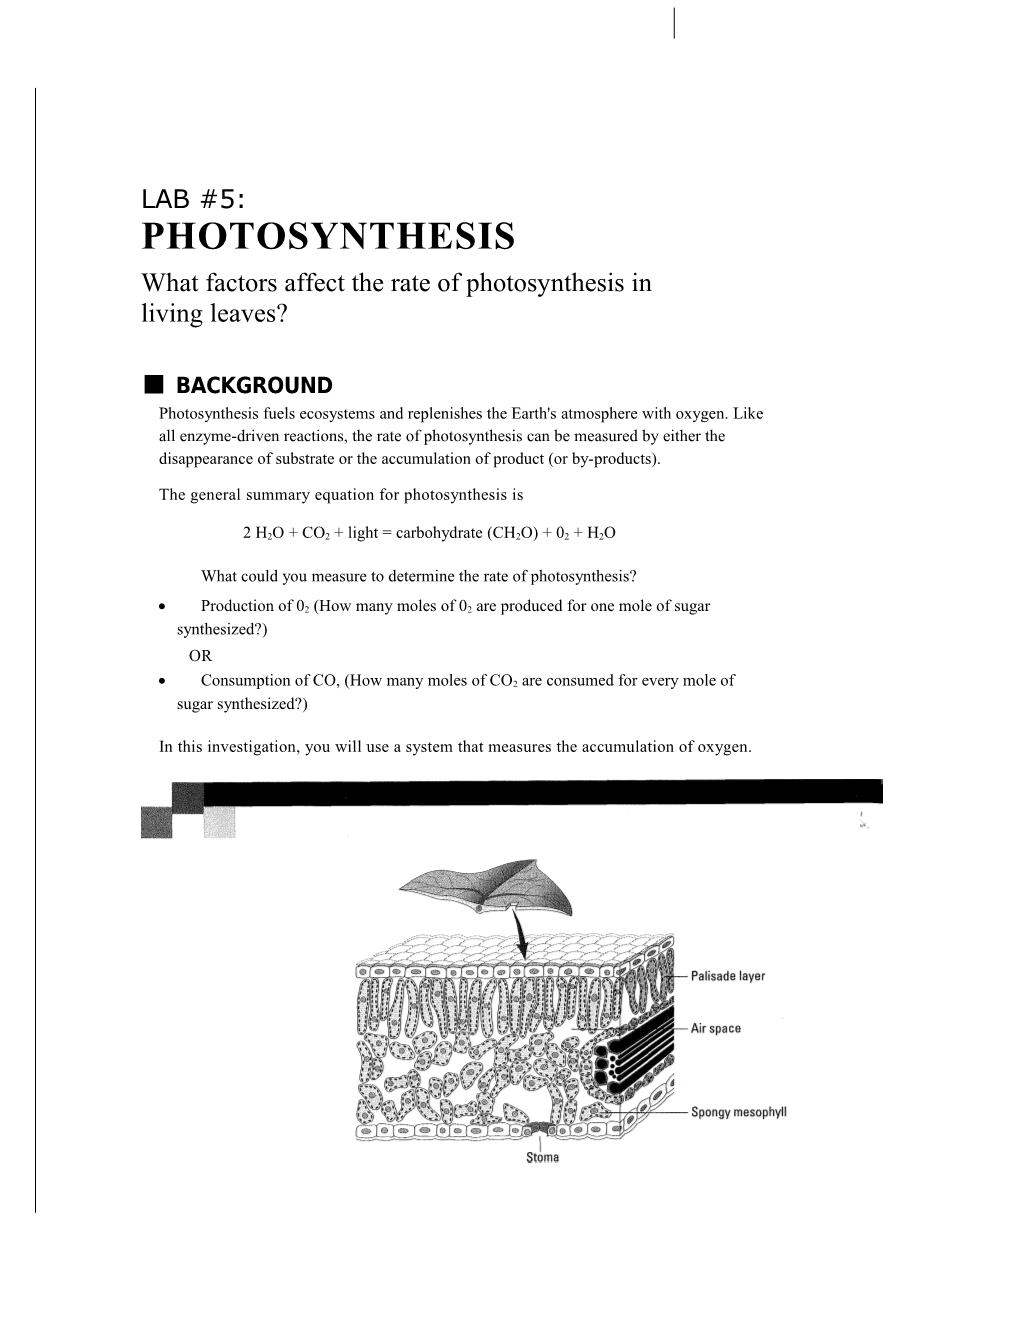 What Factors Affect the Rate of Photosynthesis in Living Leaves?